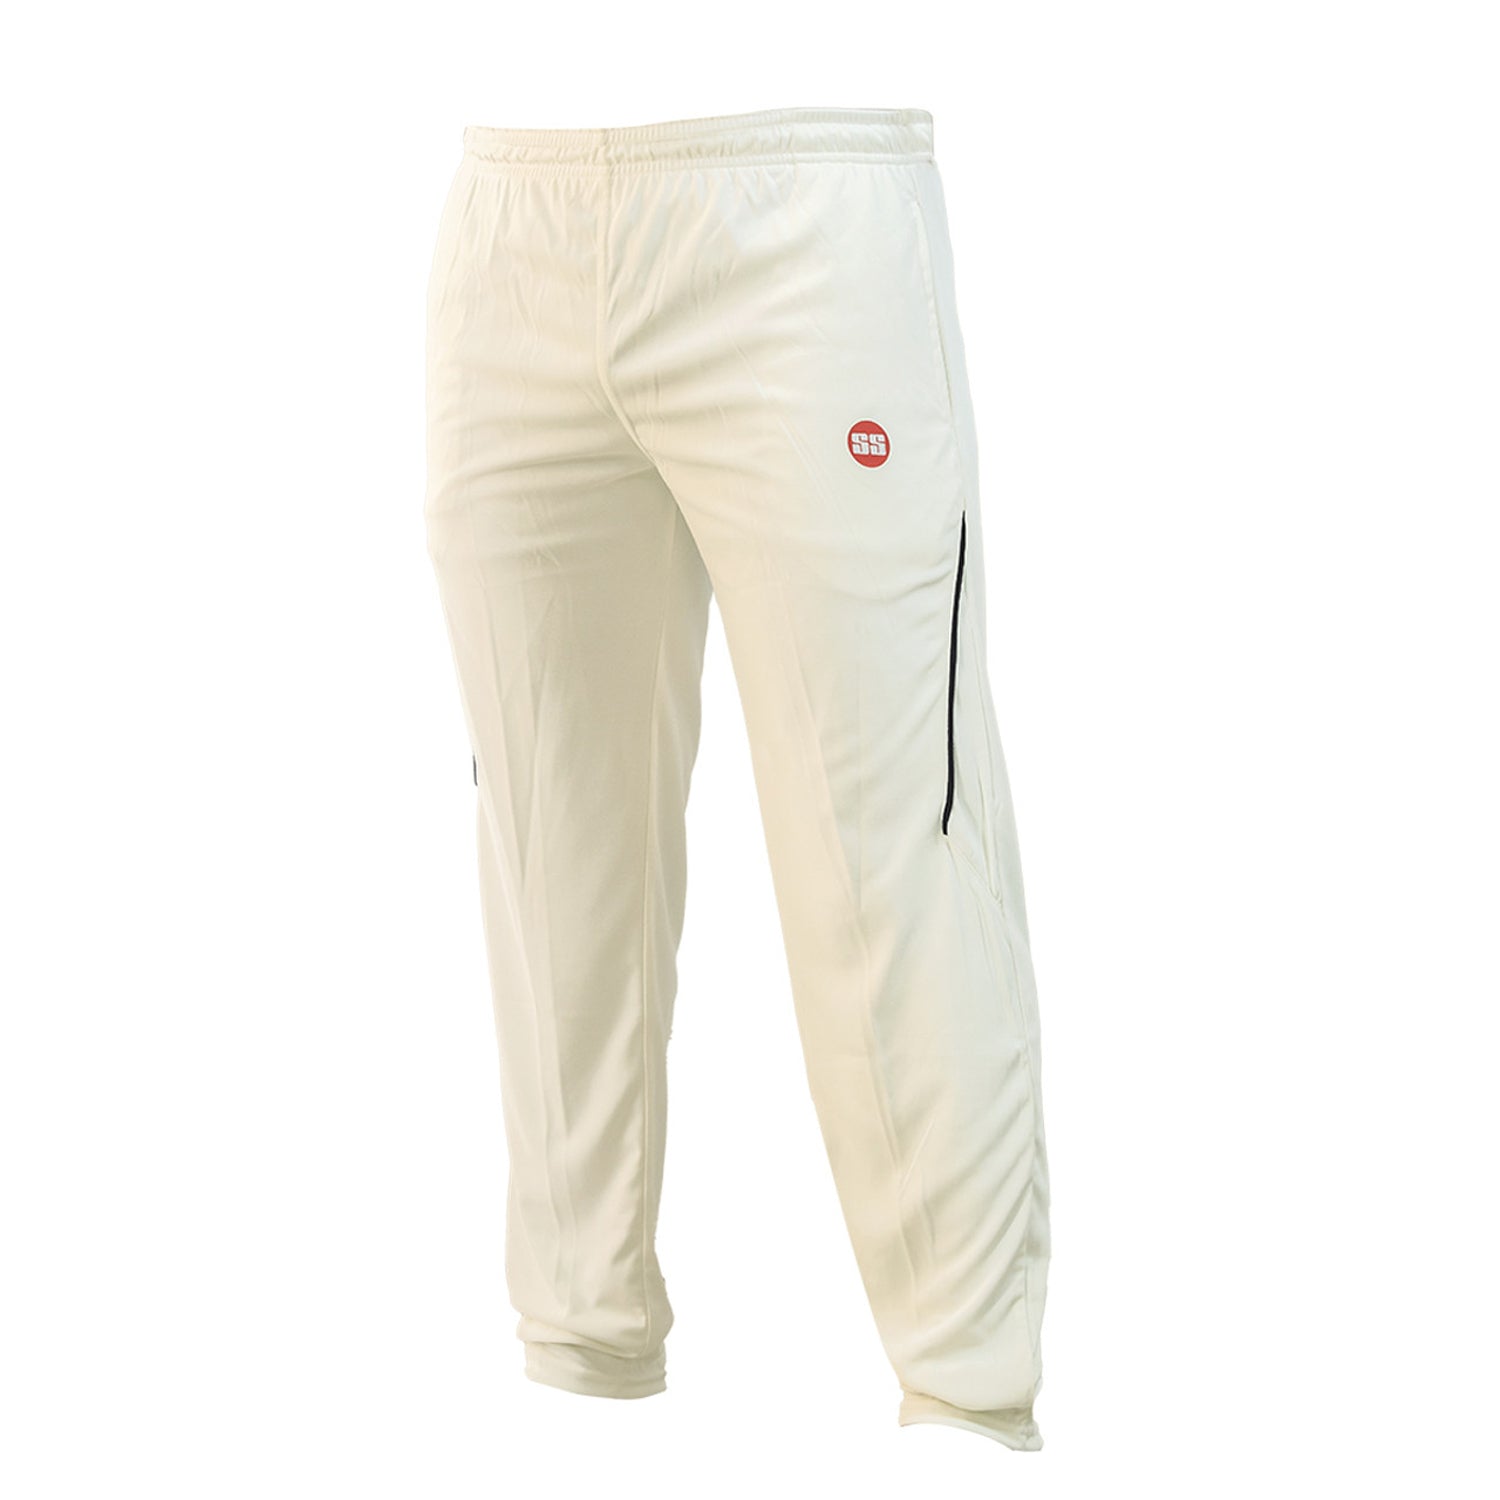 Playing Trousers  777 Cricket